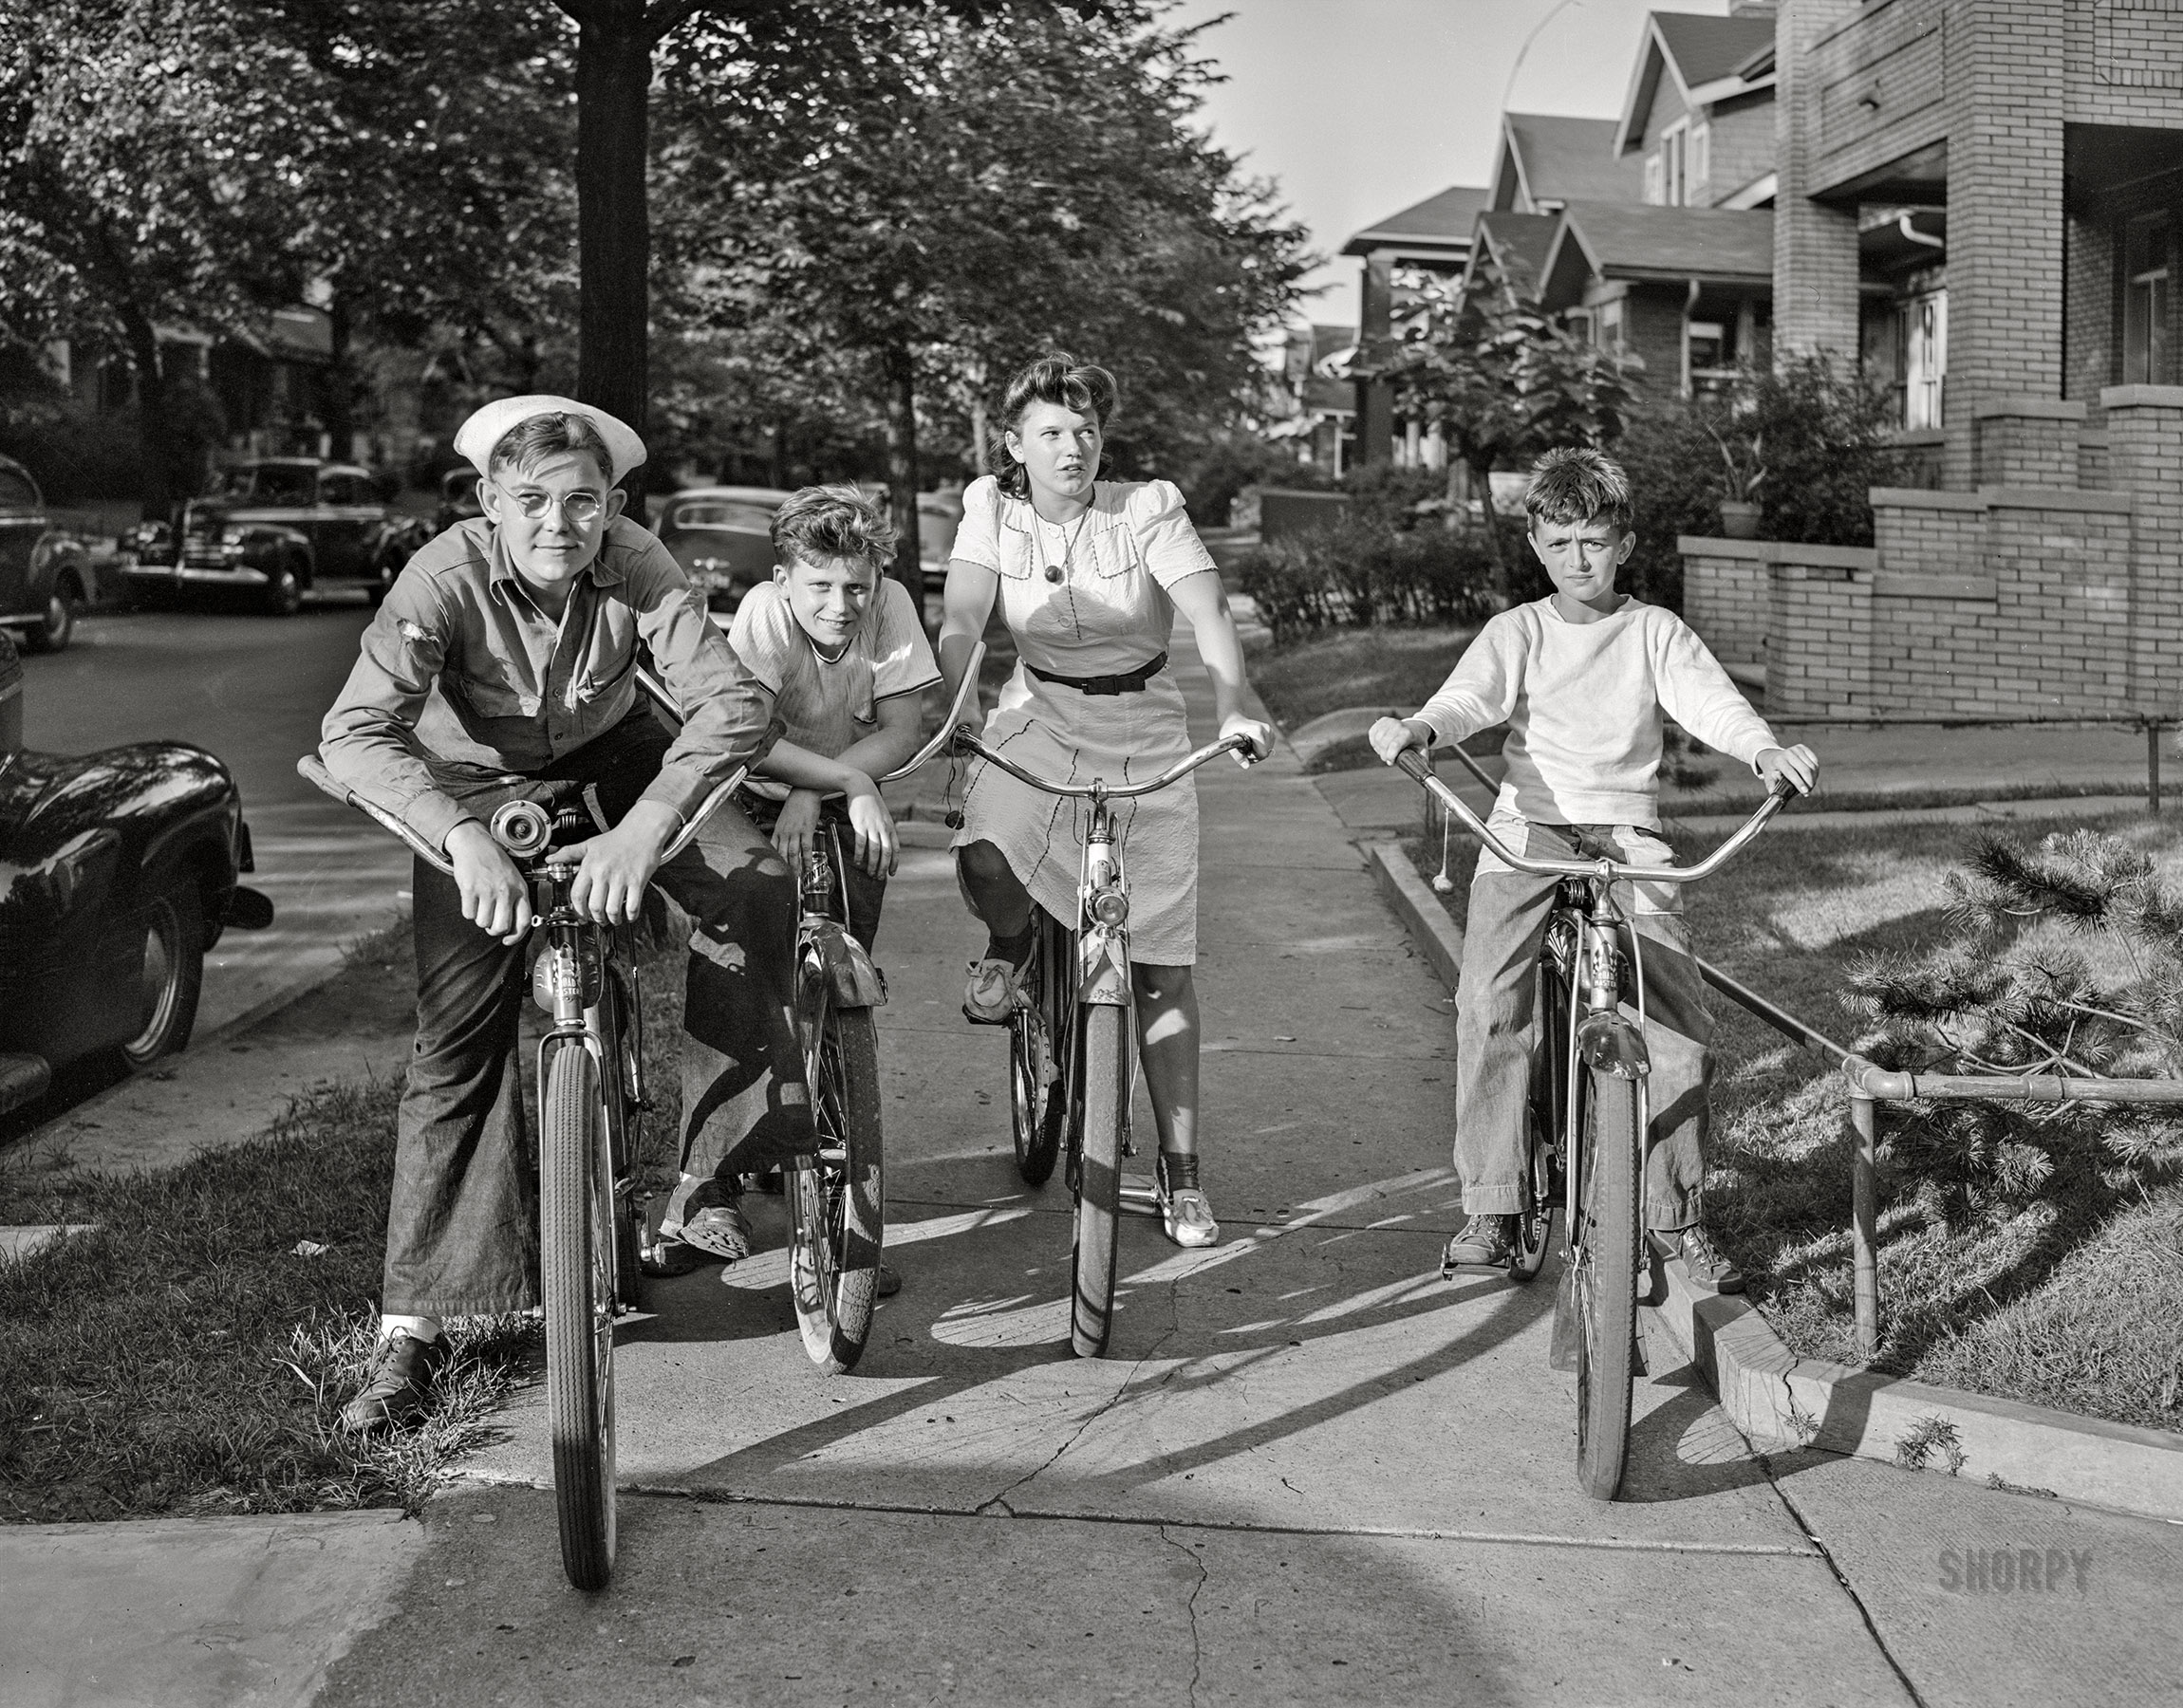 July 1942. "Detroit, Michigan. Boys and a girl on bicycles." 4x5 inch acetate negative by Arthur Siegel for the Farm Security Administration. View full size.